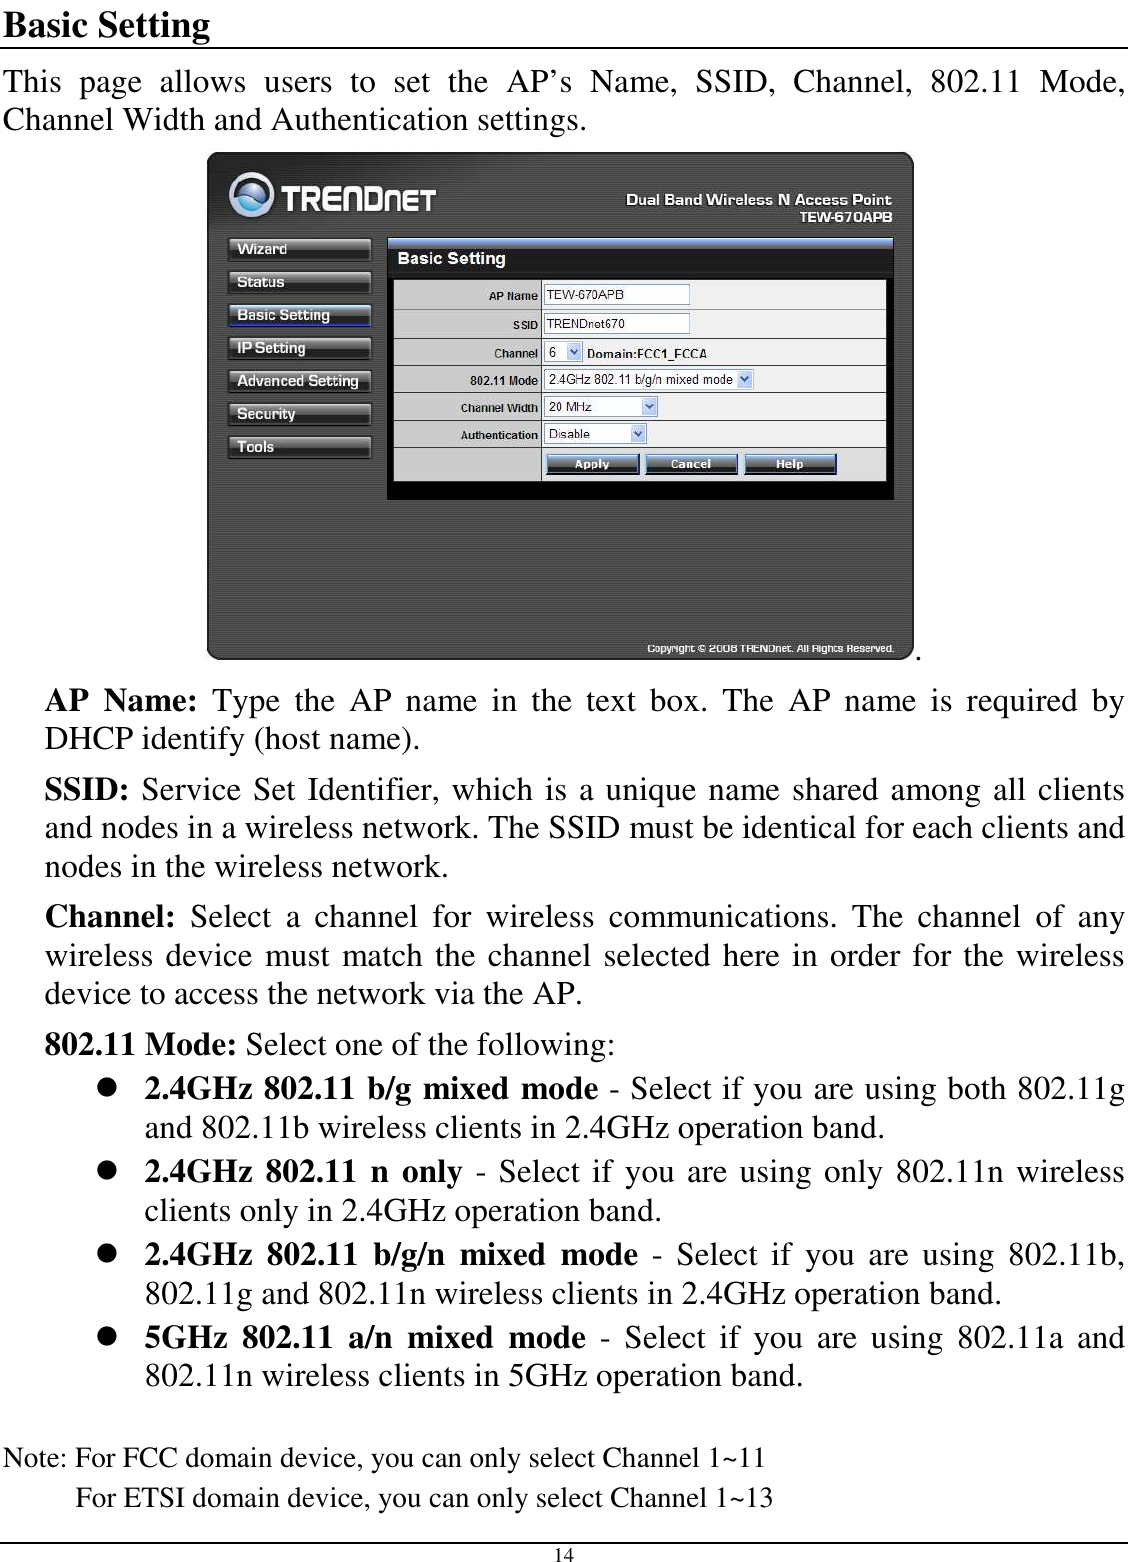  14 Basic Setting This  page  allows  users  to  set  the  AP’s  Name,  SSID,  Channel,  802.11  Mode, Channel Width and Authentication settings. . AP  Name:  Type  the  AP  name  in  the  text  box.  The  AP  name  is  required  by DHCP identify (host name). SSID: Service Set Identifier, which is a unique name shared among all clients and nodes in a wireless network. The SSID must be identical for each clients and nodes in the wireless network. Channel:  Select  a  channel  for  wireless  communications.  The  channel  of  any wireless device must match the channel selected here in order for the wireless device to access the network via the AP. 802.11 Mode: Select one of the following:  2.4GHz 802.11 b/g mixed mode - Select if you are using both 802.11g and 802.11b wireless clients in 2.4GHz operation band.  2.4GHz 802.11 n only - Select if you are using only 802.11n wireless clients only in 2.4GHz operation band.  2.4GHz  802.11  b/g/n  mixed  mode  -  Select  if  you are  using 802.11b, 802.11g and 802.11n wireless clients in 2.4GHz operation band.  5GHz  802.11  a/n  mixed  mode  -  Select  if  you  are  using  802.11a  and 802.11n wireless clients in 5GHz operation band.  Note: For FCC domain device, you can only select Channel 1~11           For ETSI domain device, you can only select Channel 1~13 